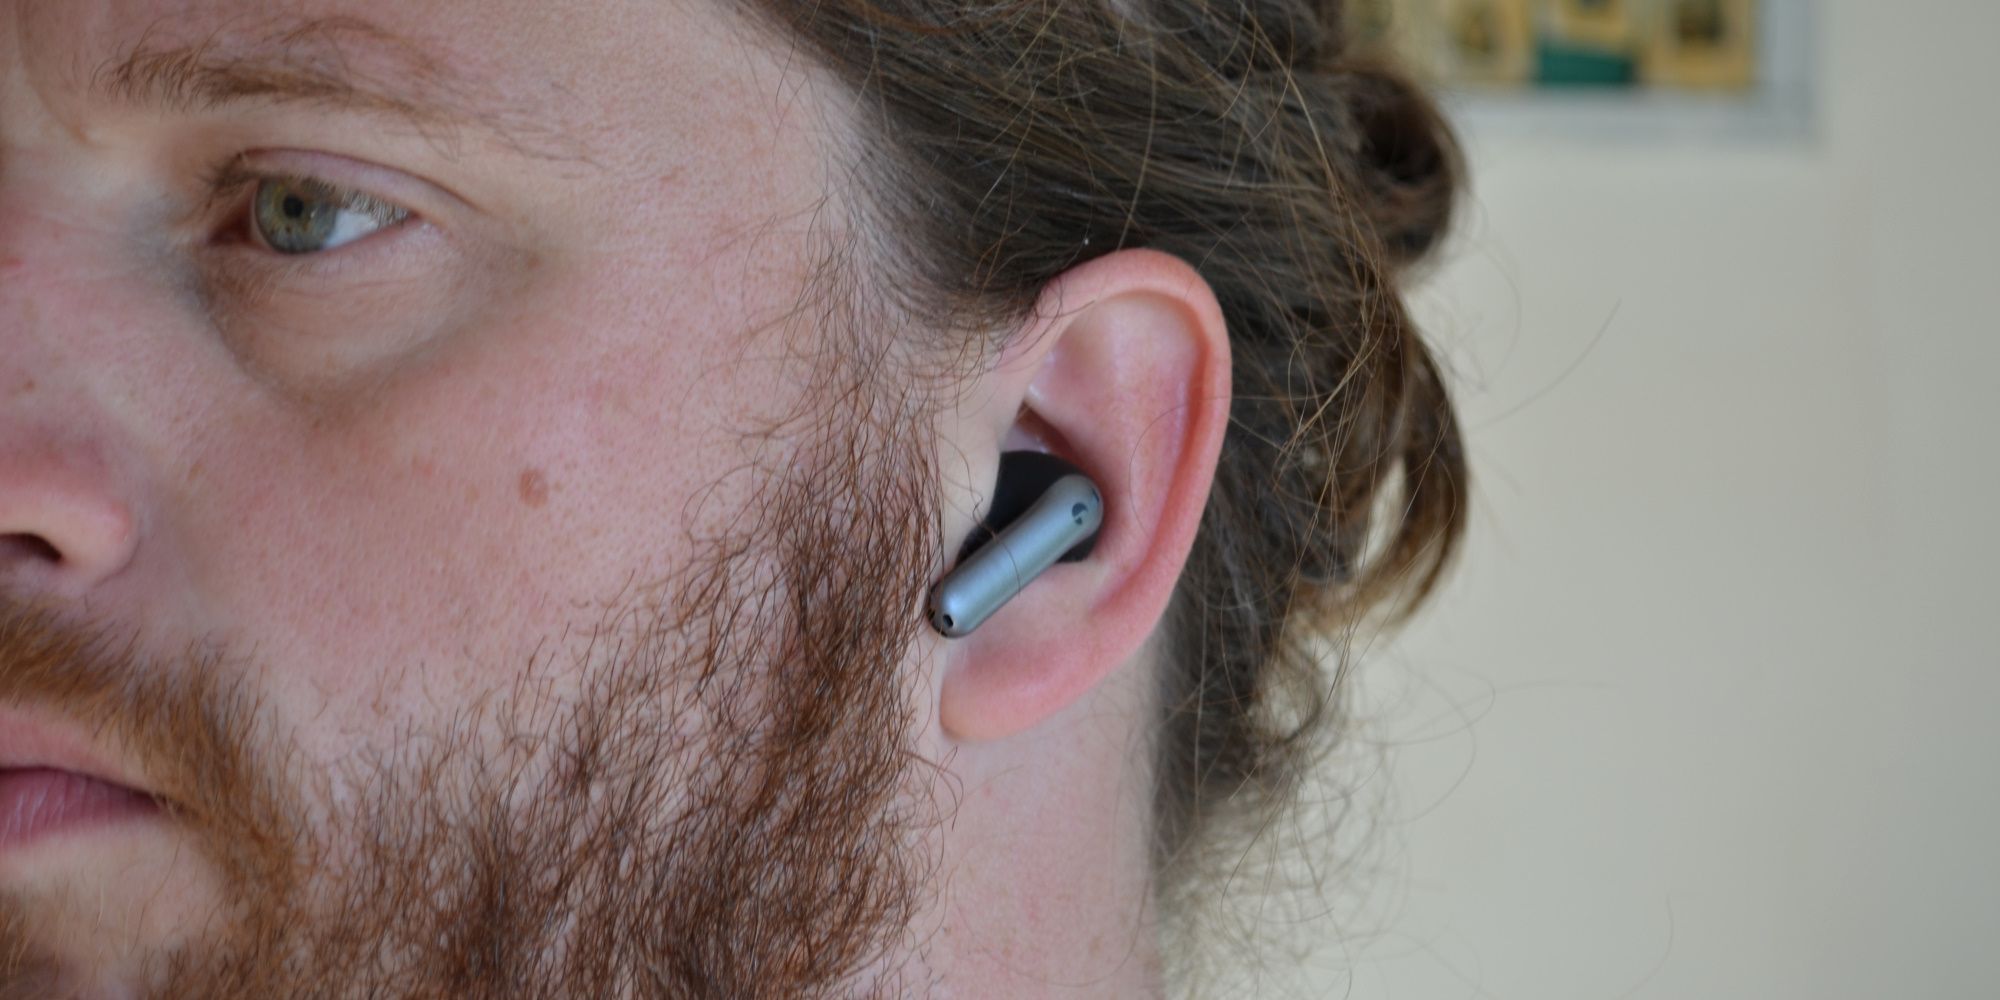 elevoc clear earbuds review wearing buds